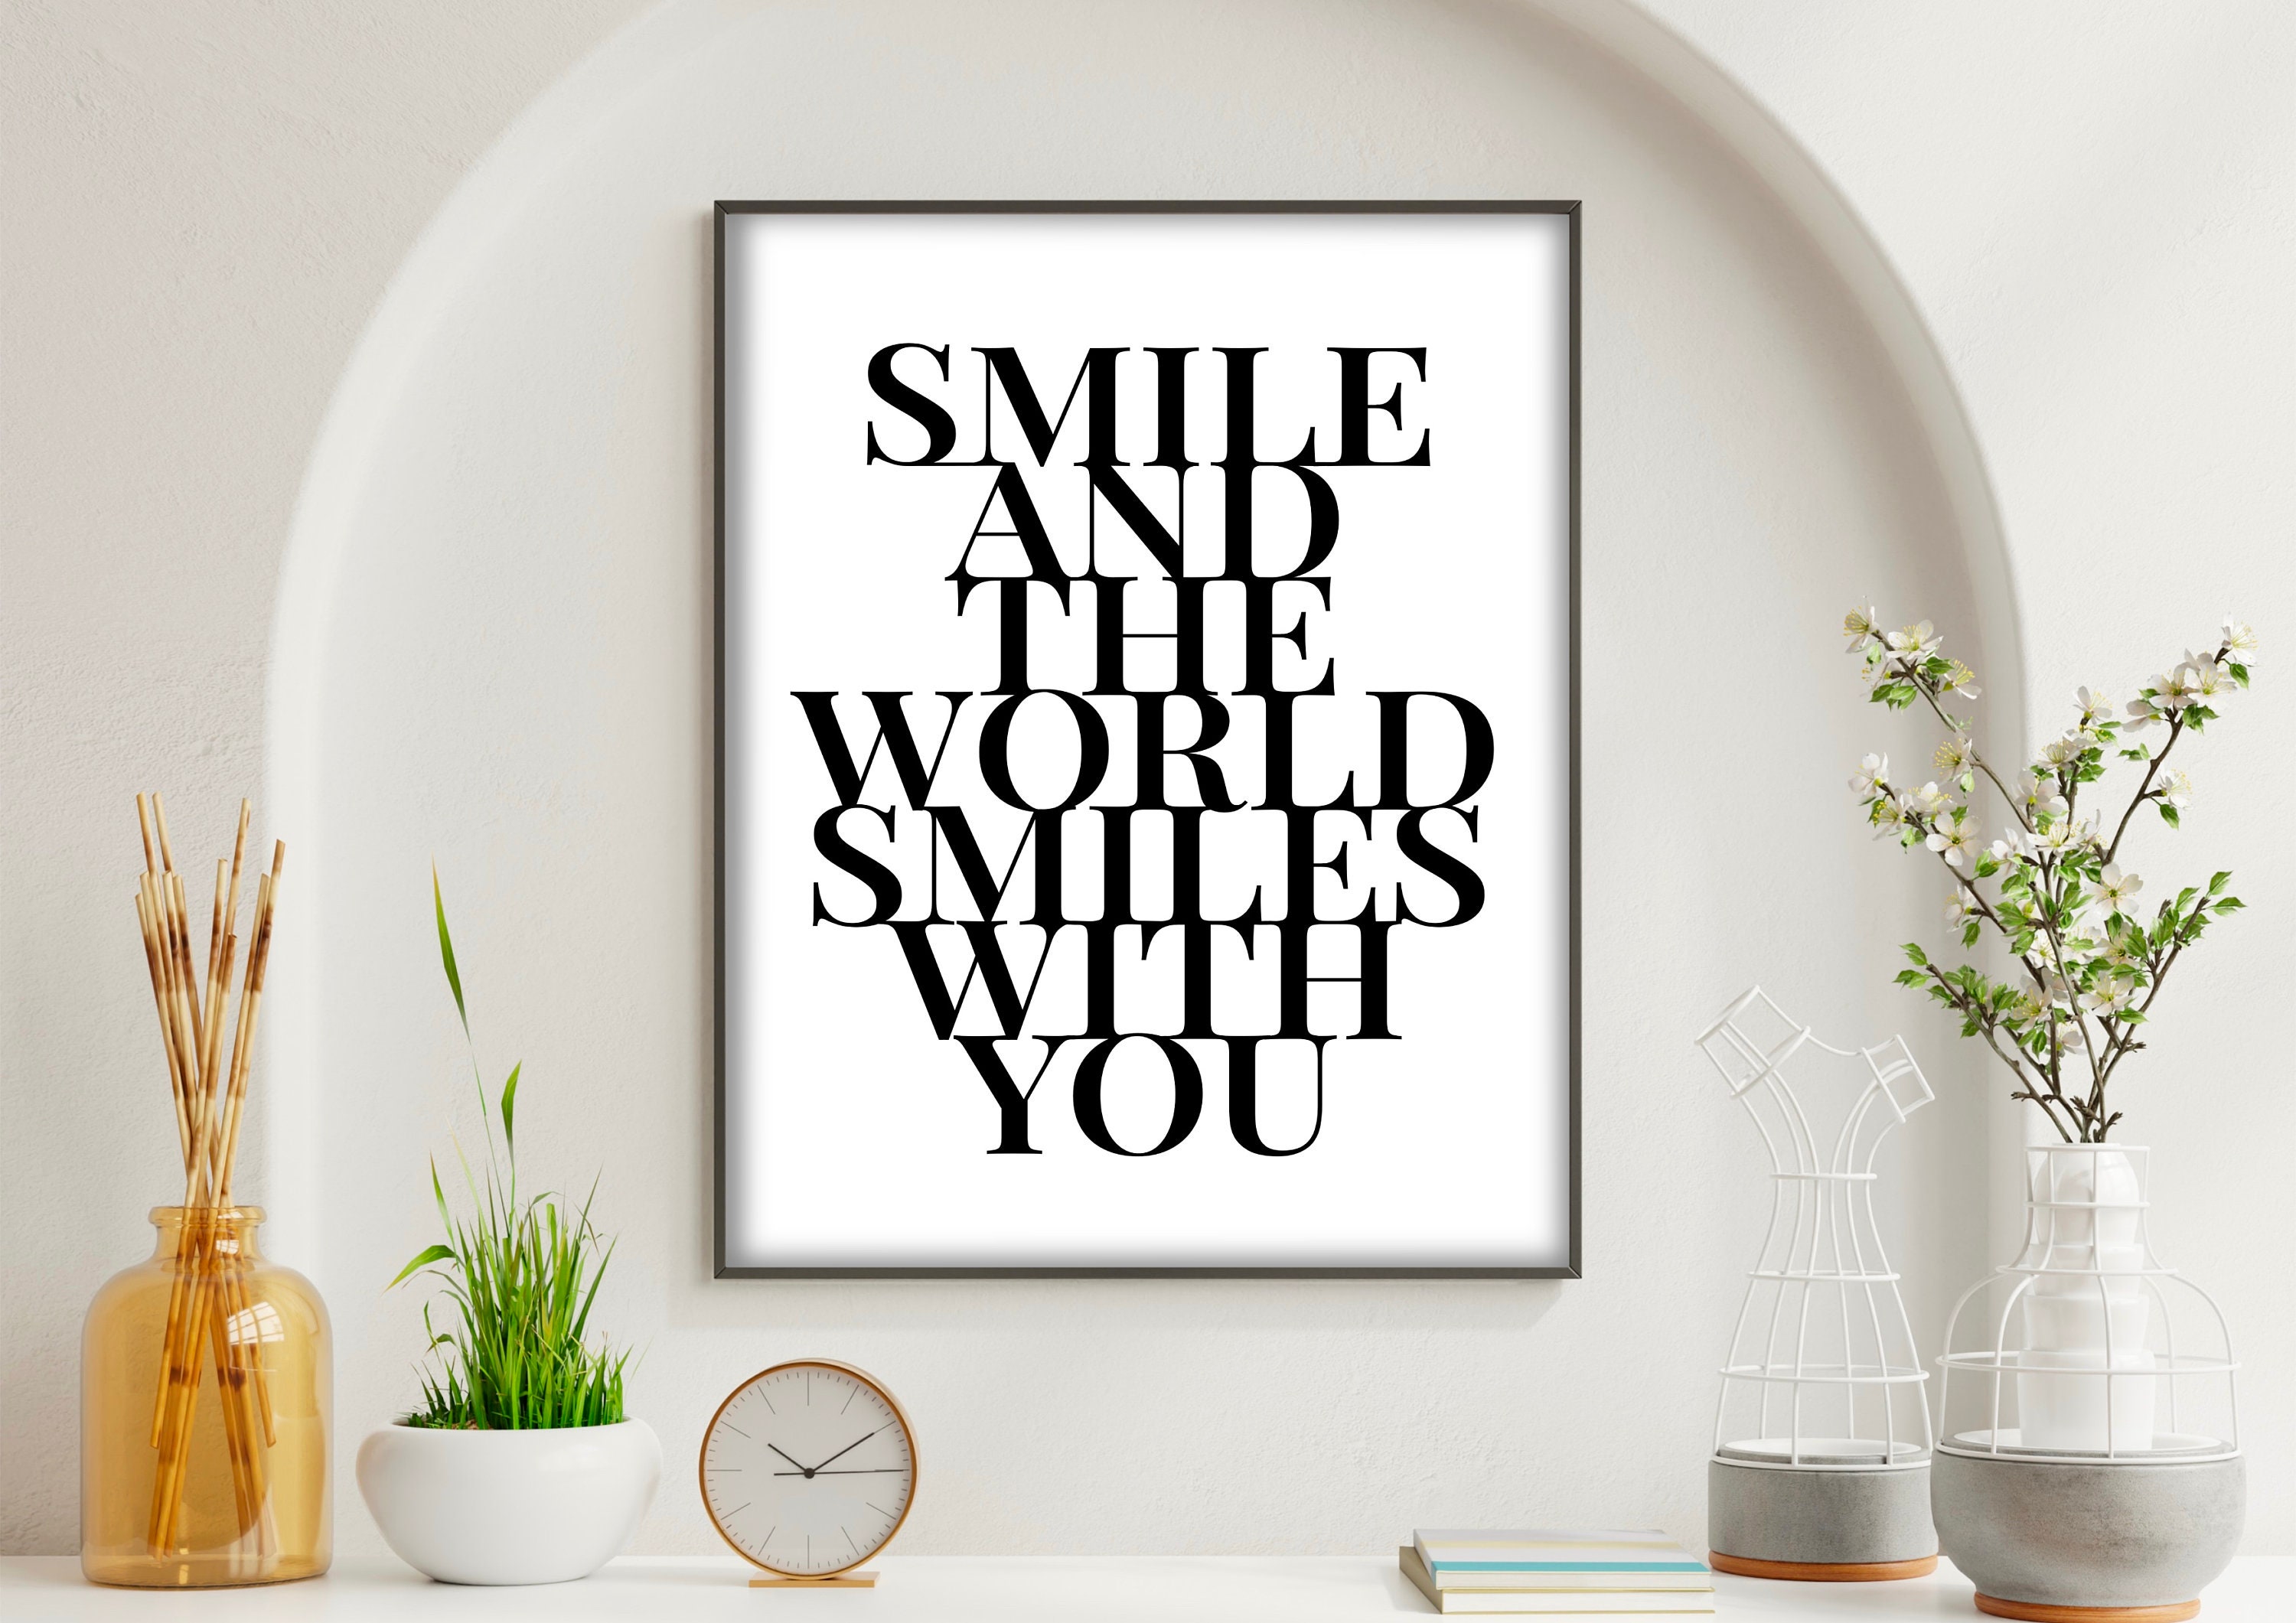 Smile and the World Smiles With You Poster, Wall Art, Quote A4, Digital  Download, Inspiration, Motivation, Home Décor, Gift for Her - Etsy